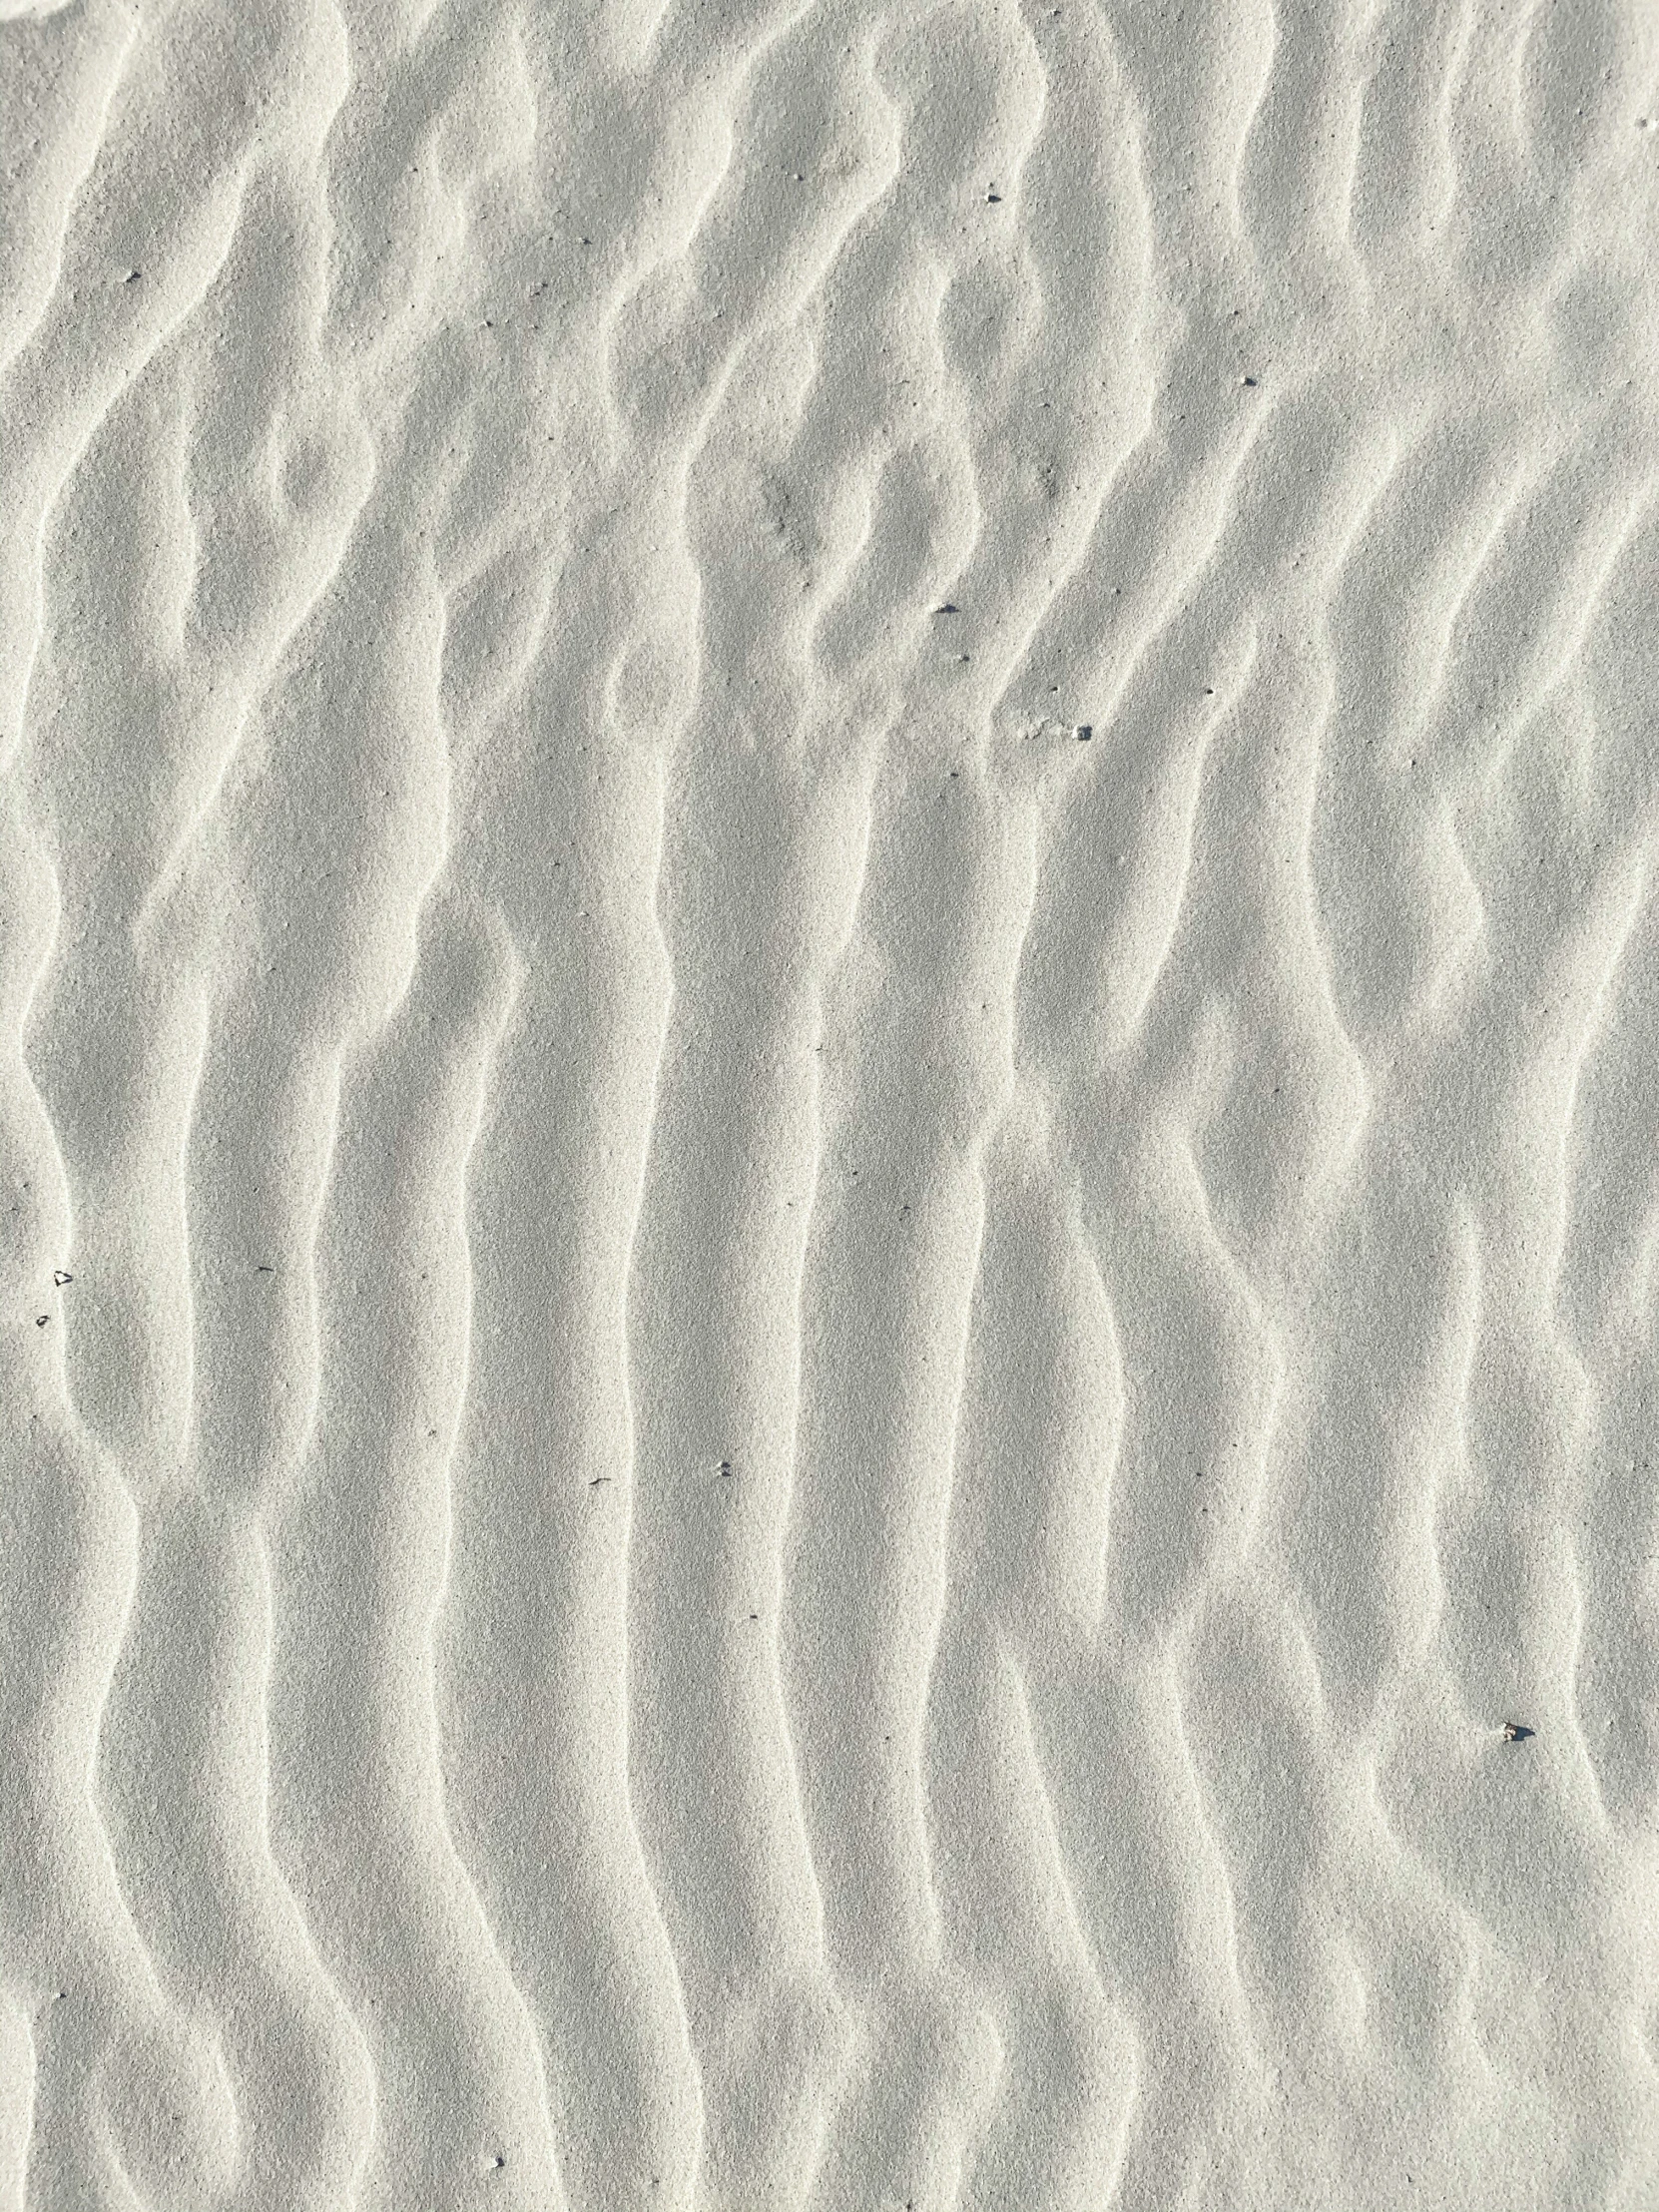 an image of patterns in the sand